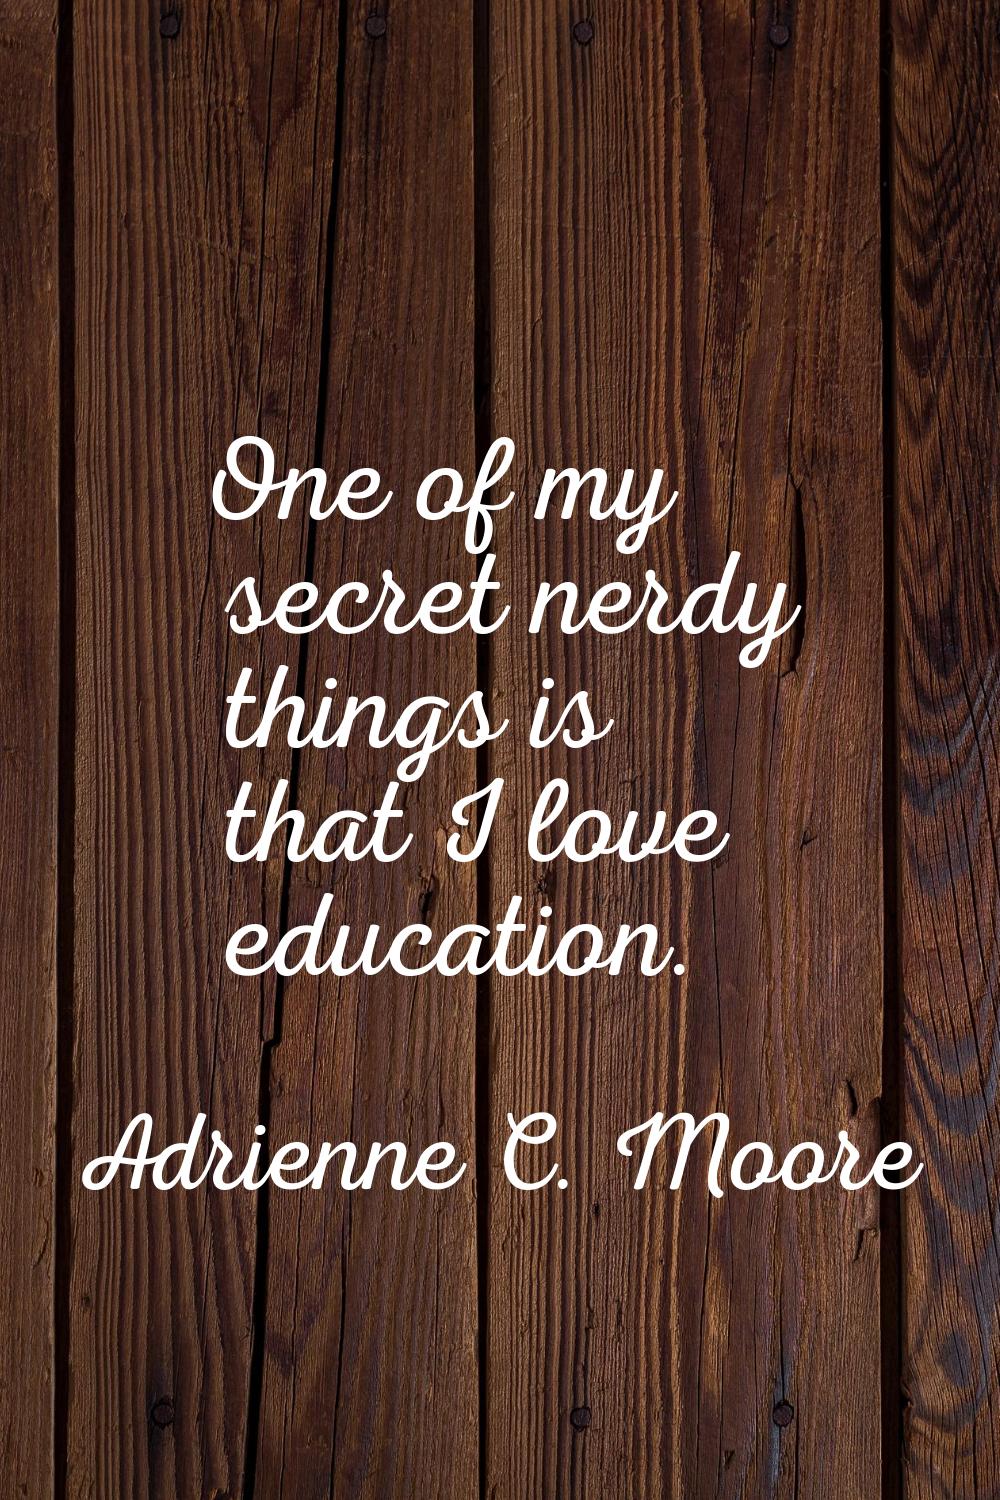 One of my secret nerdy things is that I love education.